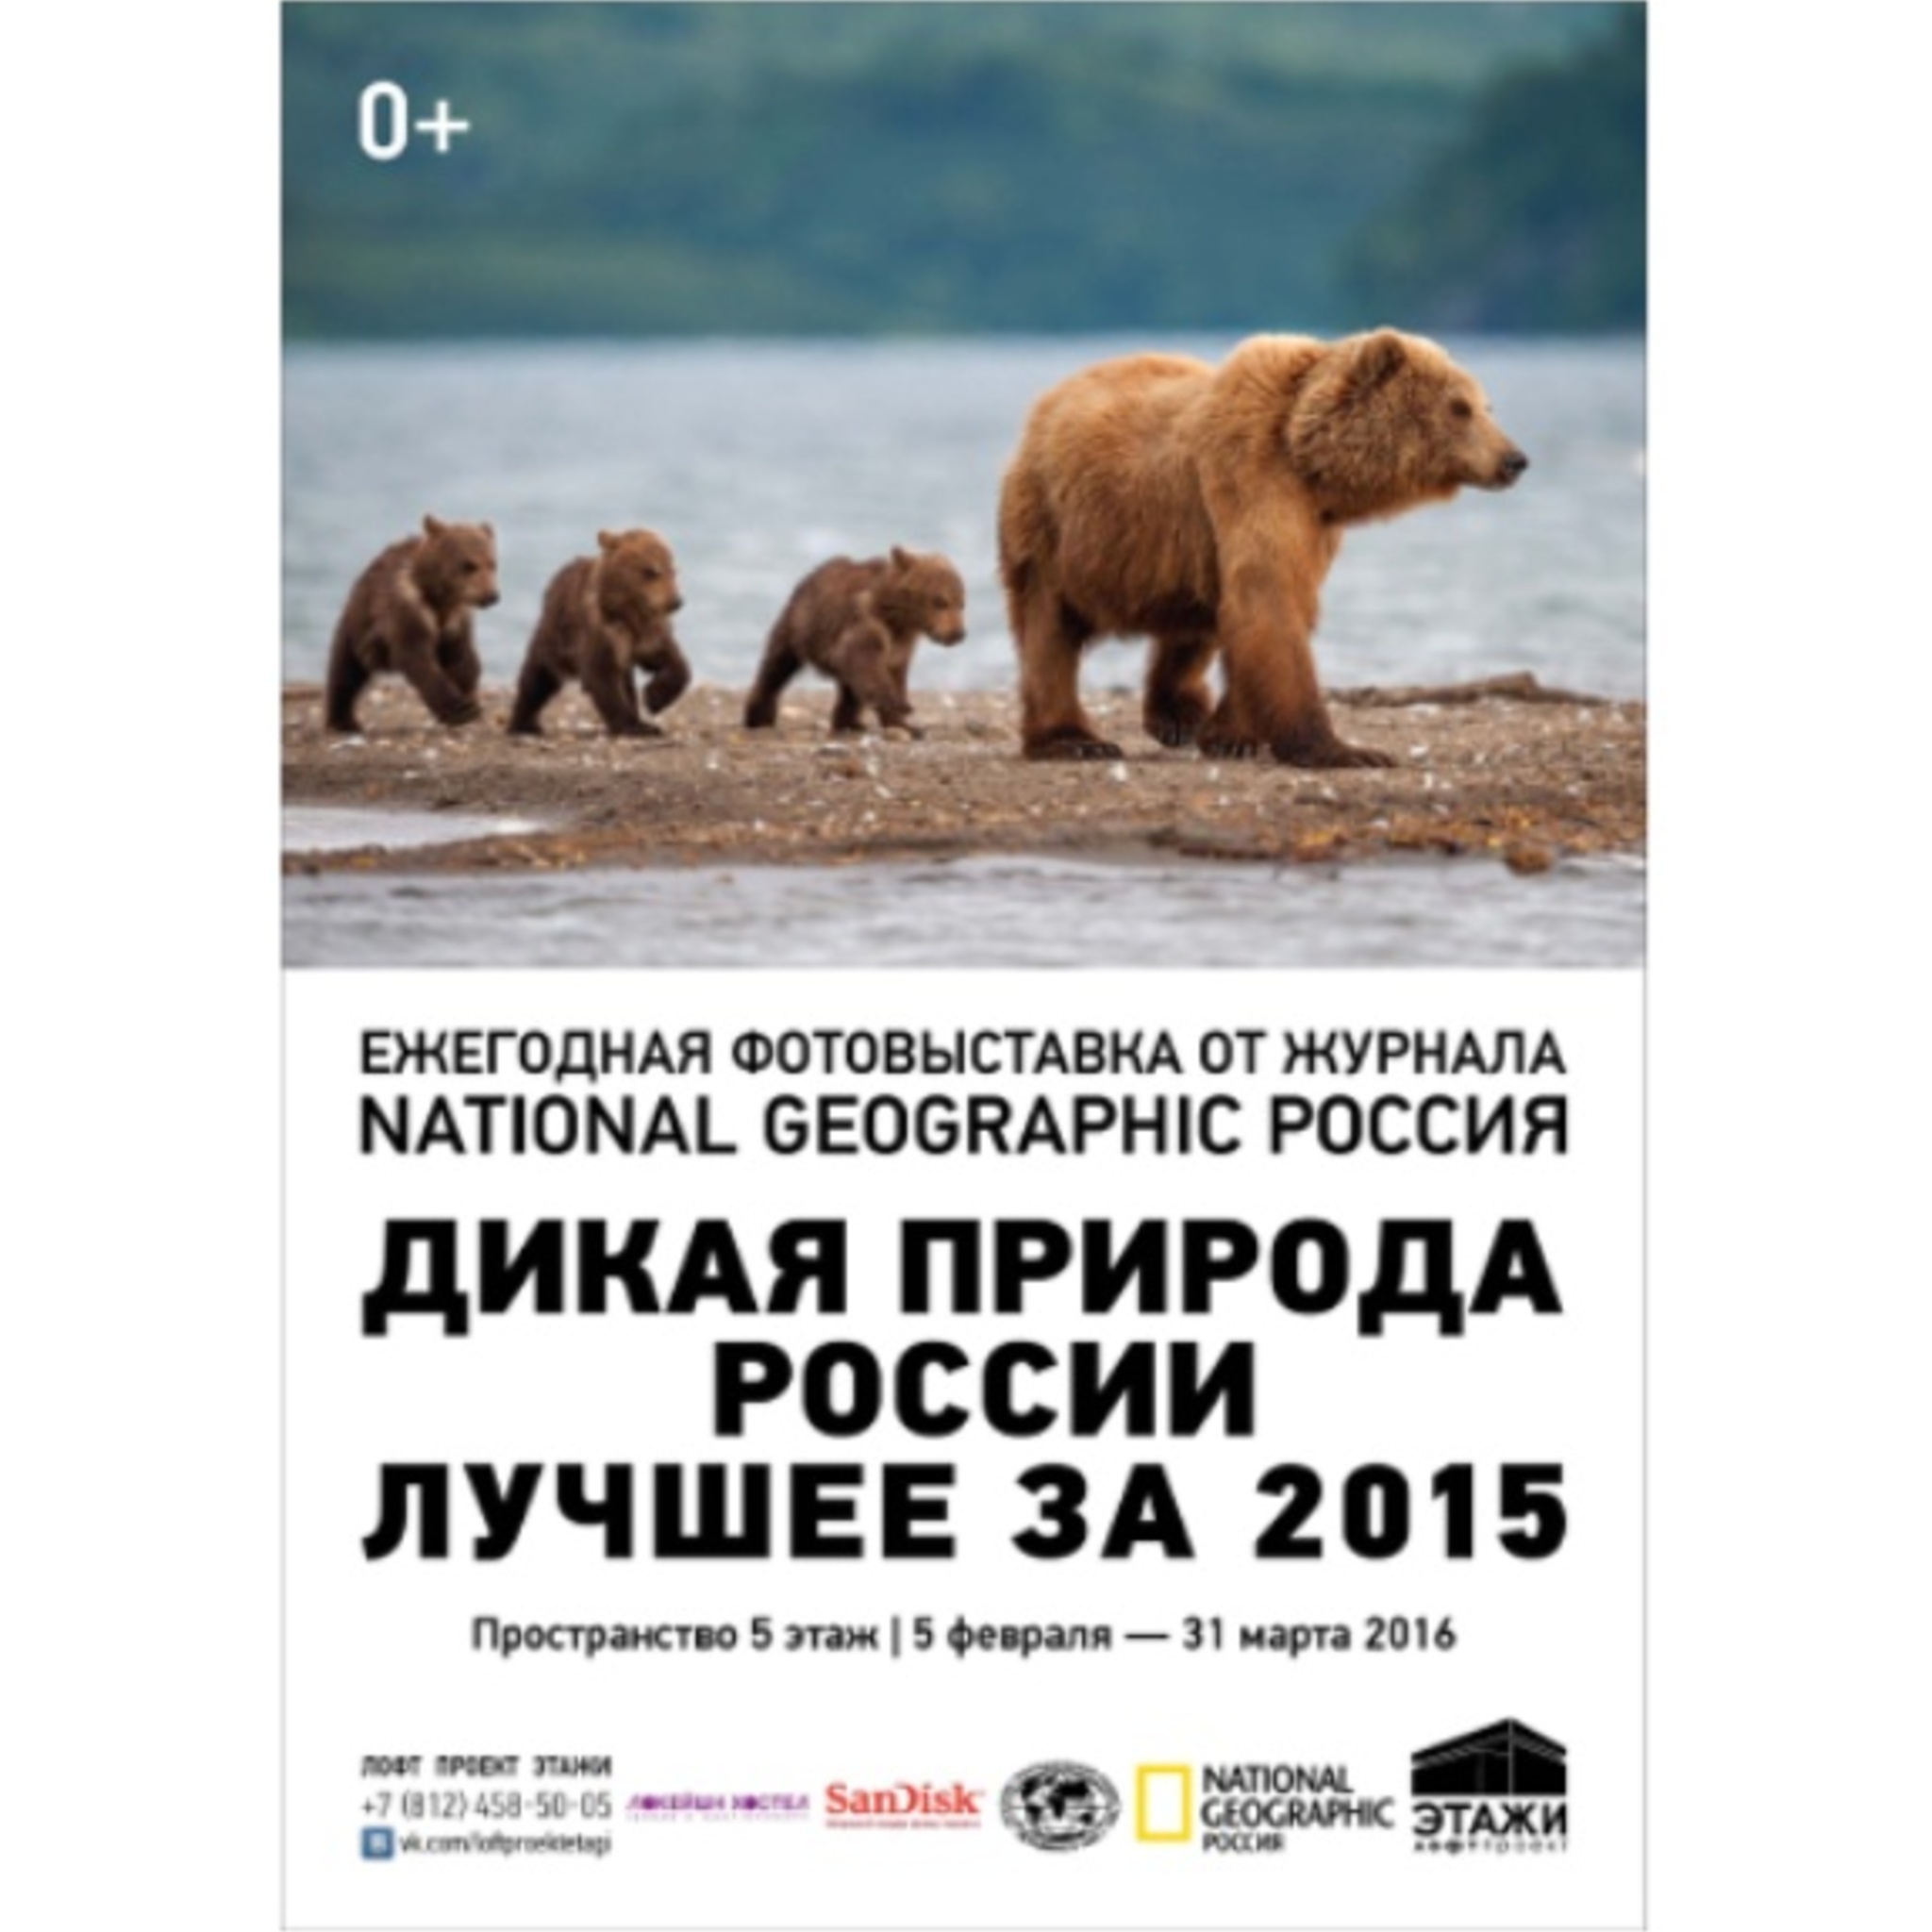 The exhibition Wild Russia: The Best of 2015